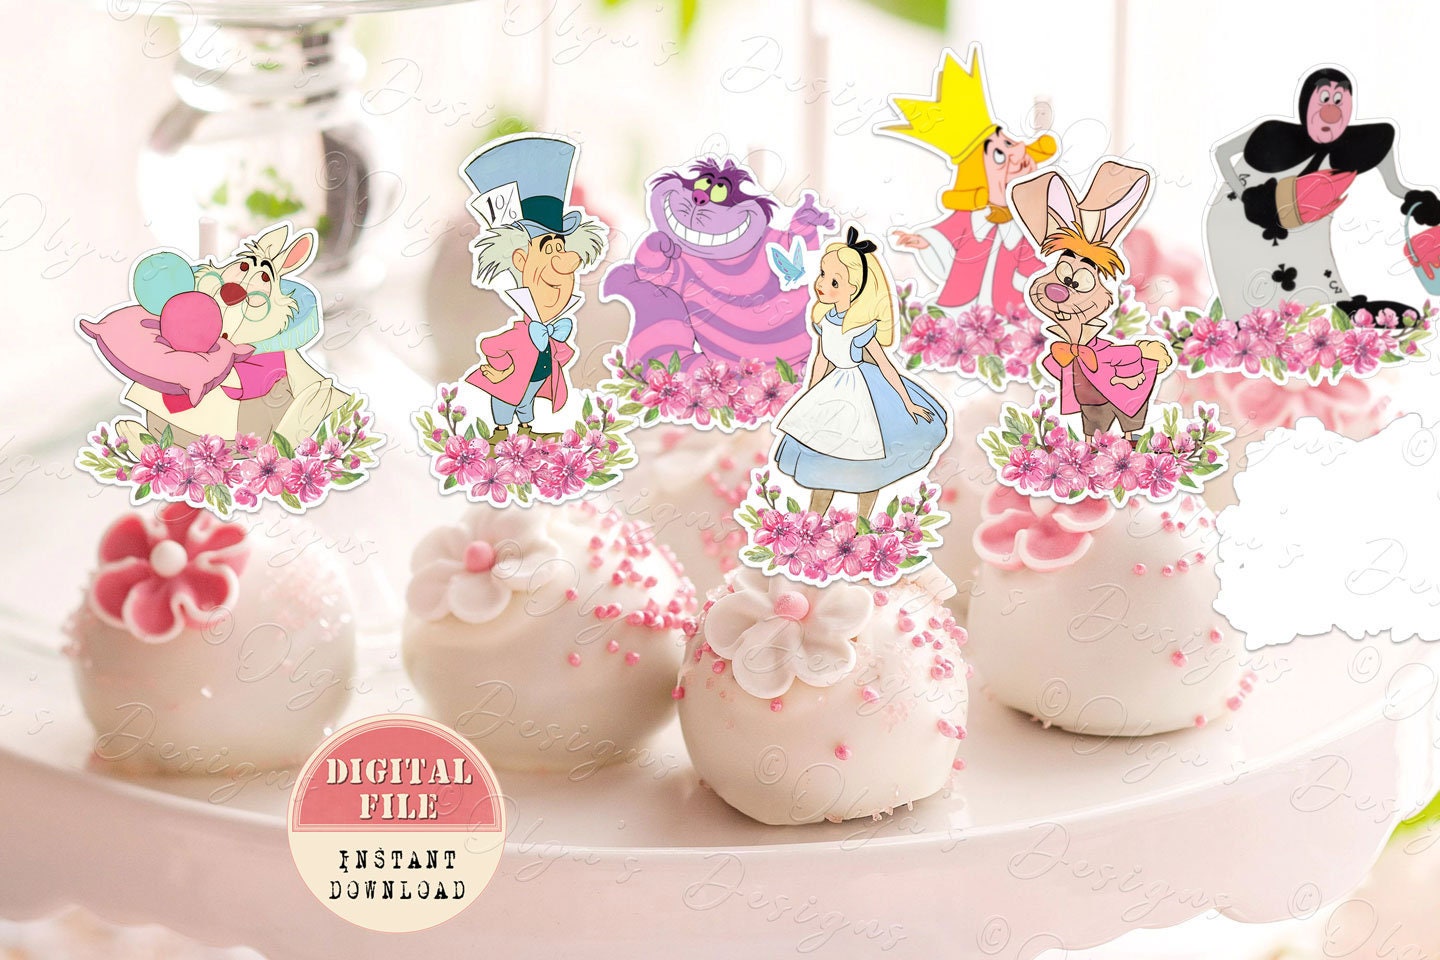 Alice in Wonderland Birthday Party Decorations,Alice in Wonderland Themed Party Pack Supplies with Happy Birthday Banner,Cake Topper,Cupcake Toppers